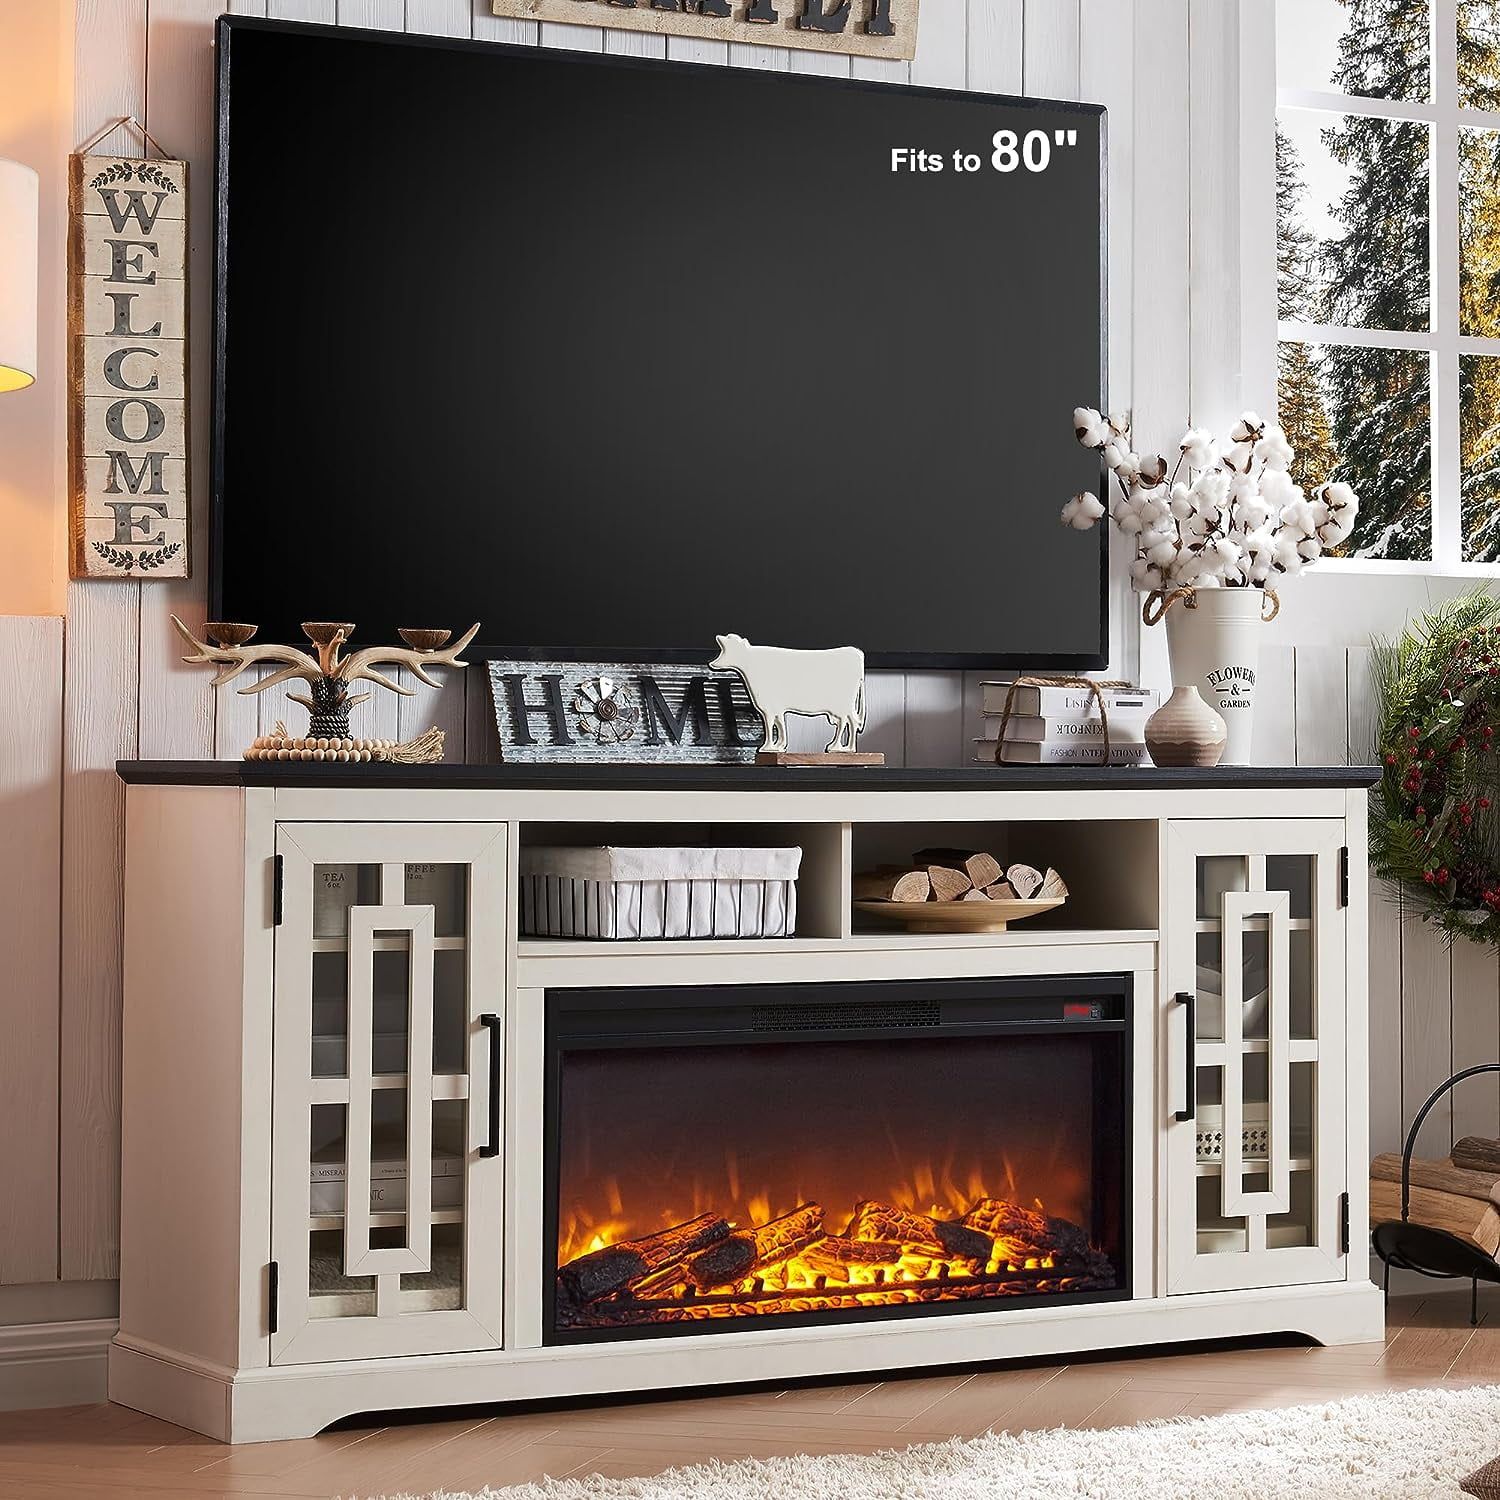 T4Tream 70" Fireplace Tv Stand For 75 80 Inch Tv, Farmhouse Highboy  Entertainment Center With Storage For Living Room, White – Walmart Inside Wood Highboy Fireplace Tv Stands (Photo 2 of 15)